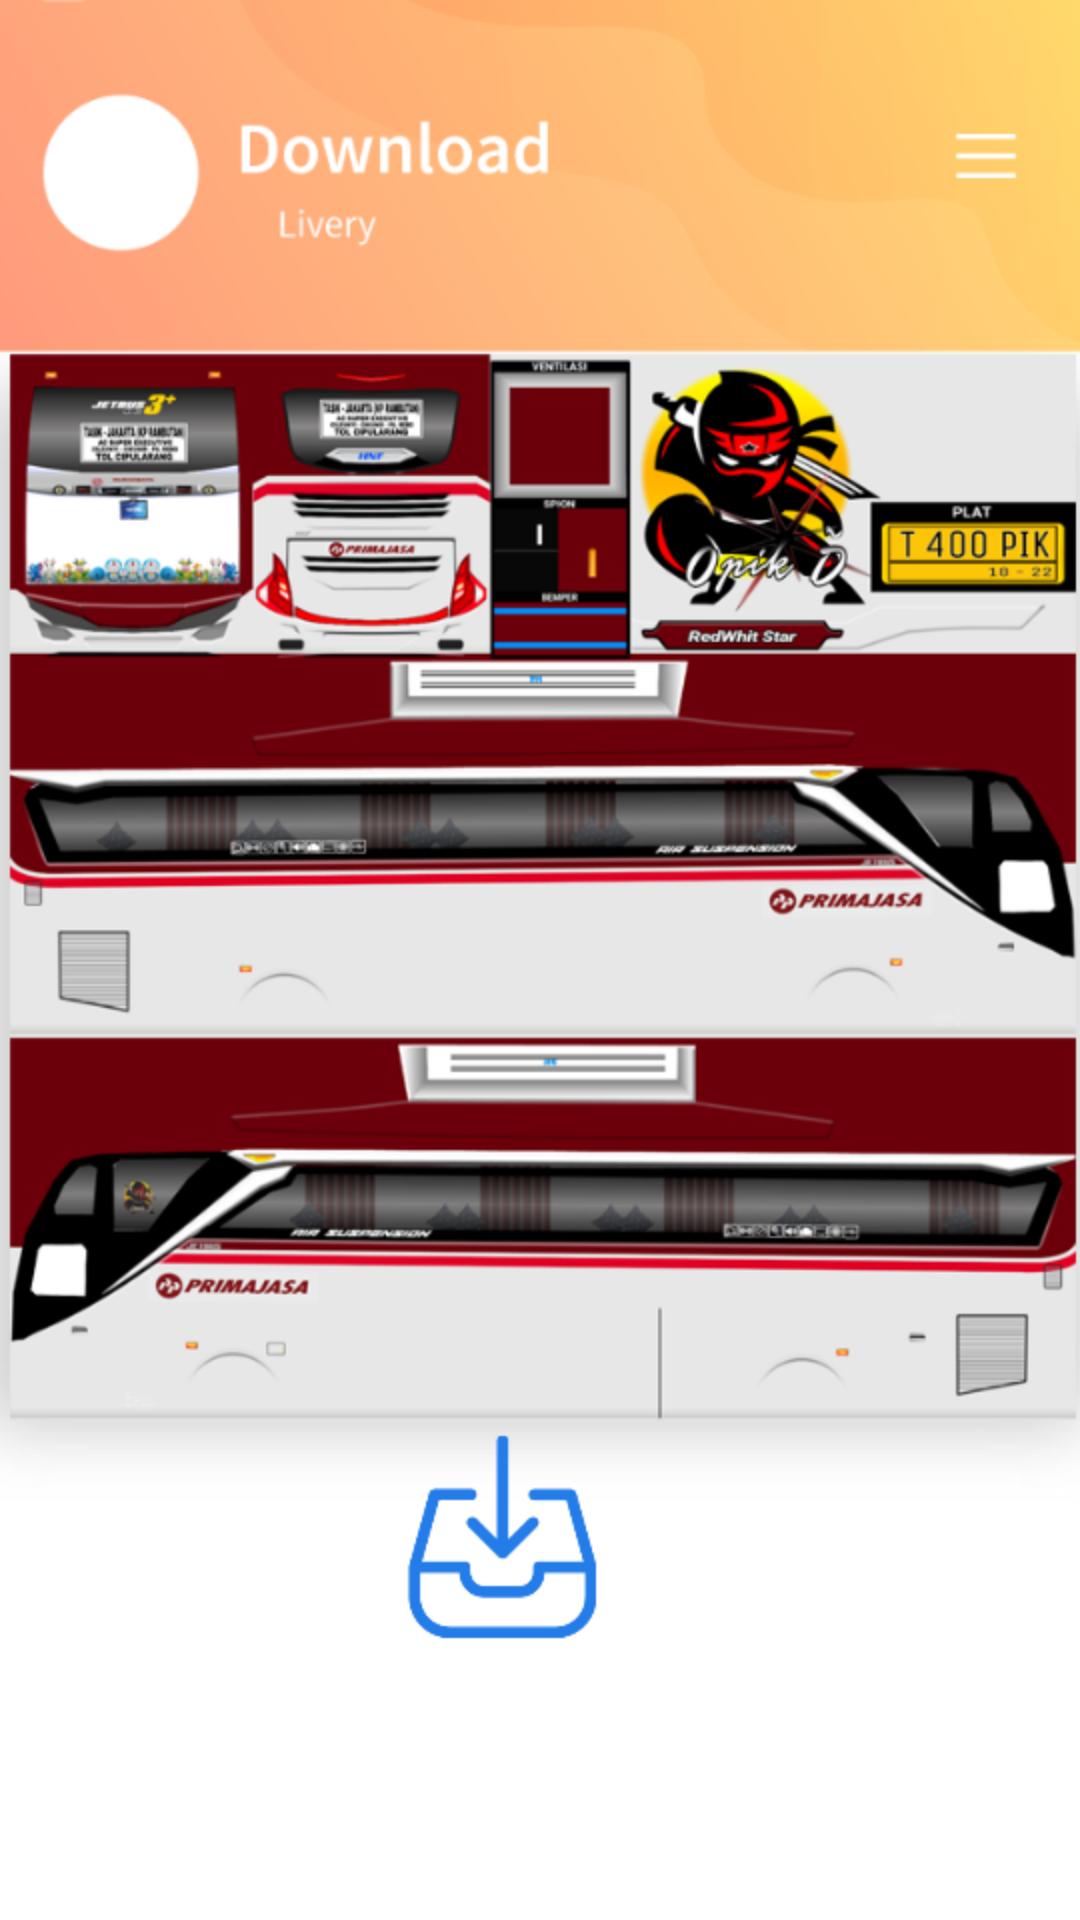 Download Livery Bussid Hd Primajasa livery truck anti gosip